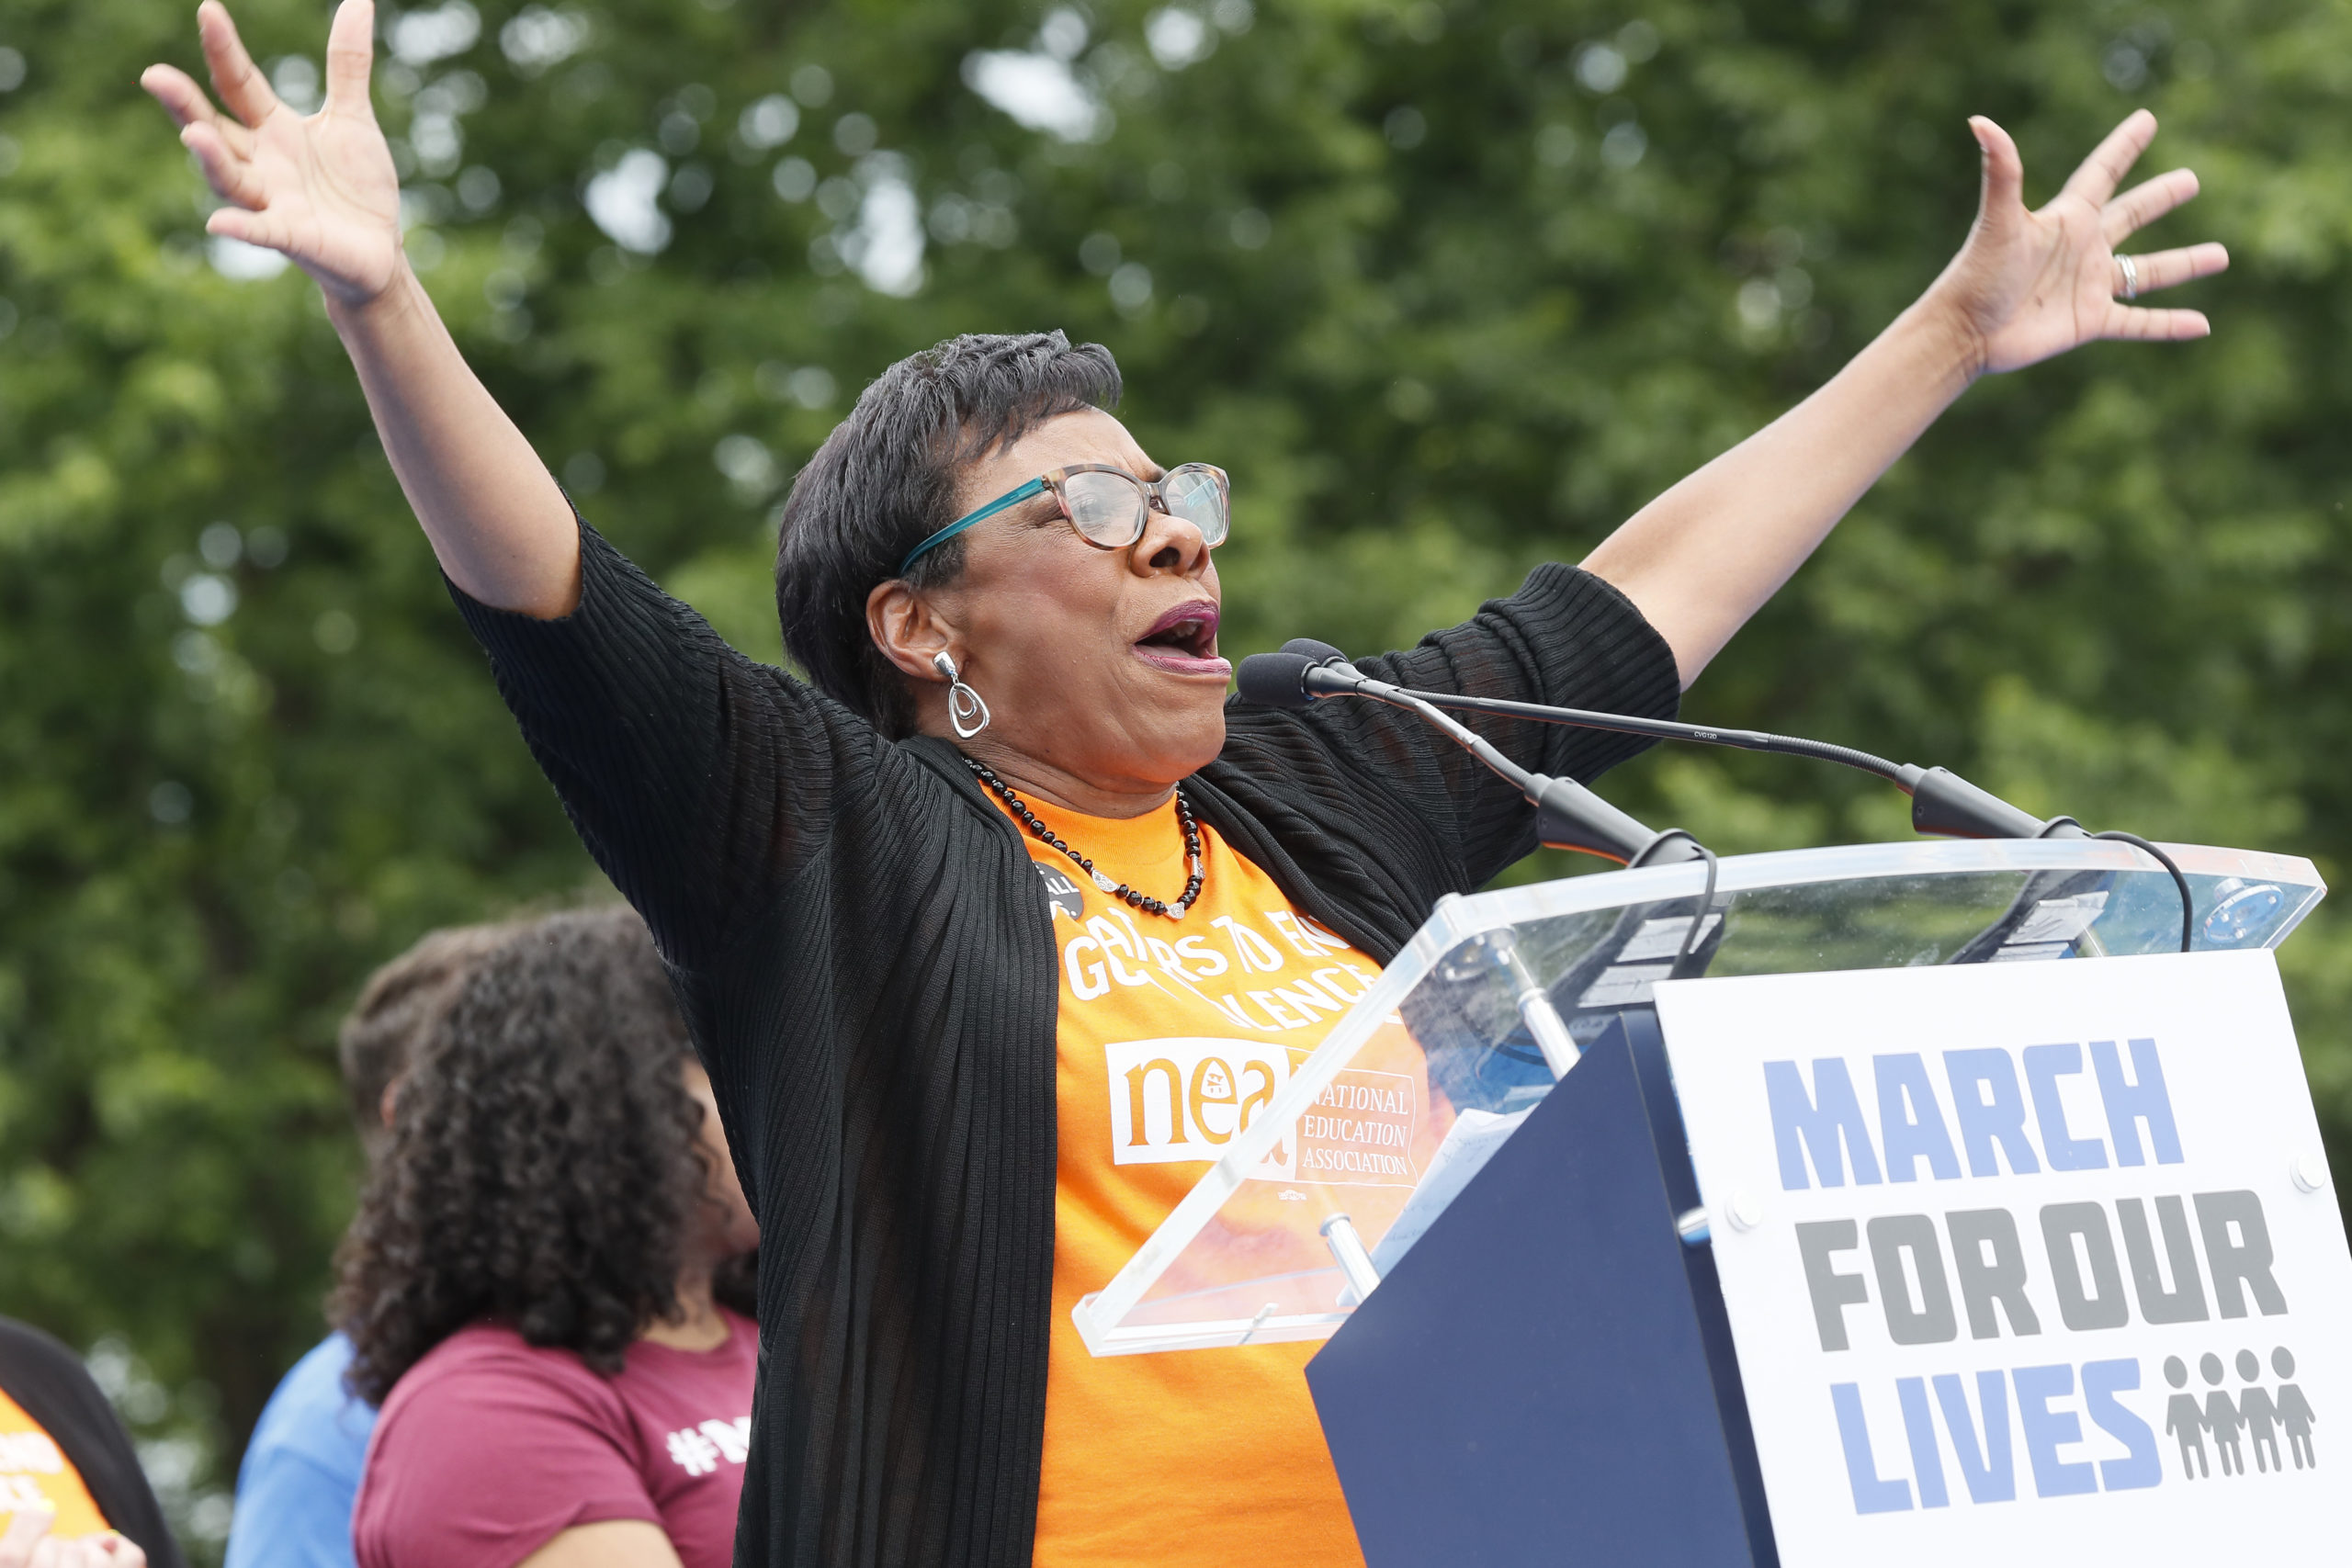 Rebecca S. Pringle speaks during March for Our Lives 2022 on June 11, 2022 in Washington, DC. Becky Pringle is the current president of the National Education Association and a lifelong educator. Amidst continued mass shootings at schools across the country, Becky has been an advocate for gun safety legislation to protect students and teachers from gun violence. (Photo by Paul Morigi/Getty Images for March For Our Lives)